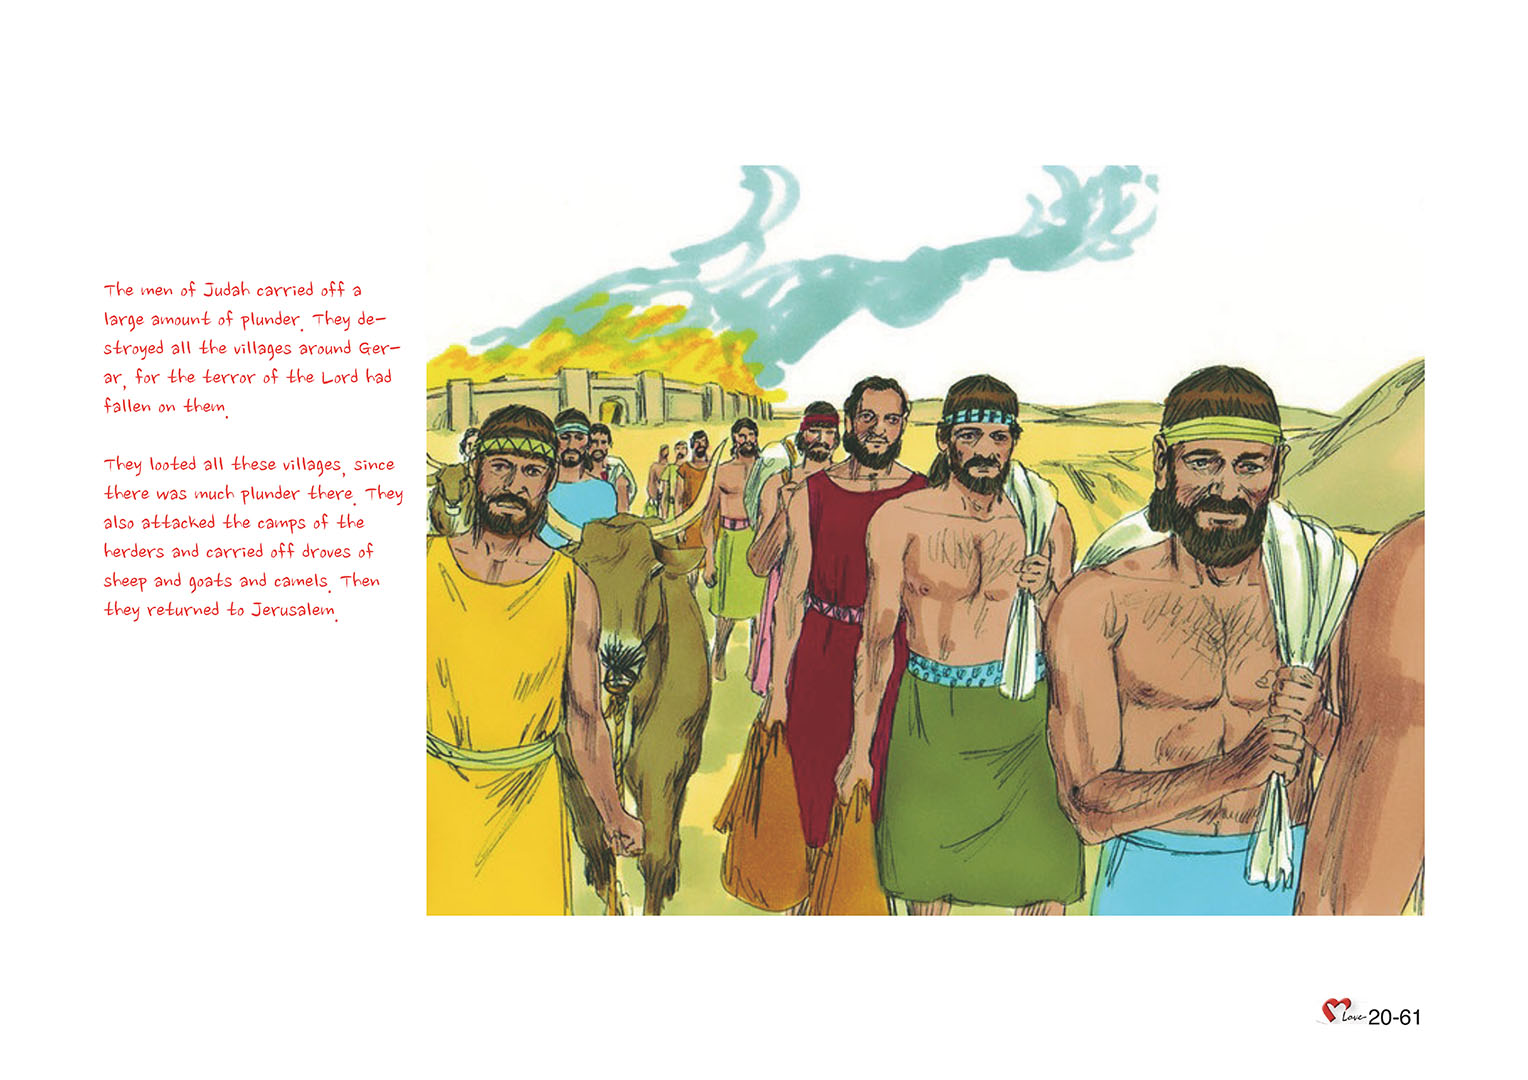 Chapter 20 - Lesson 60 - Kings of Southern Kingdom-Rehoboam, Abijah and Asa